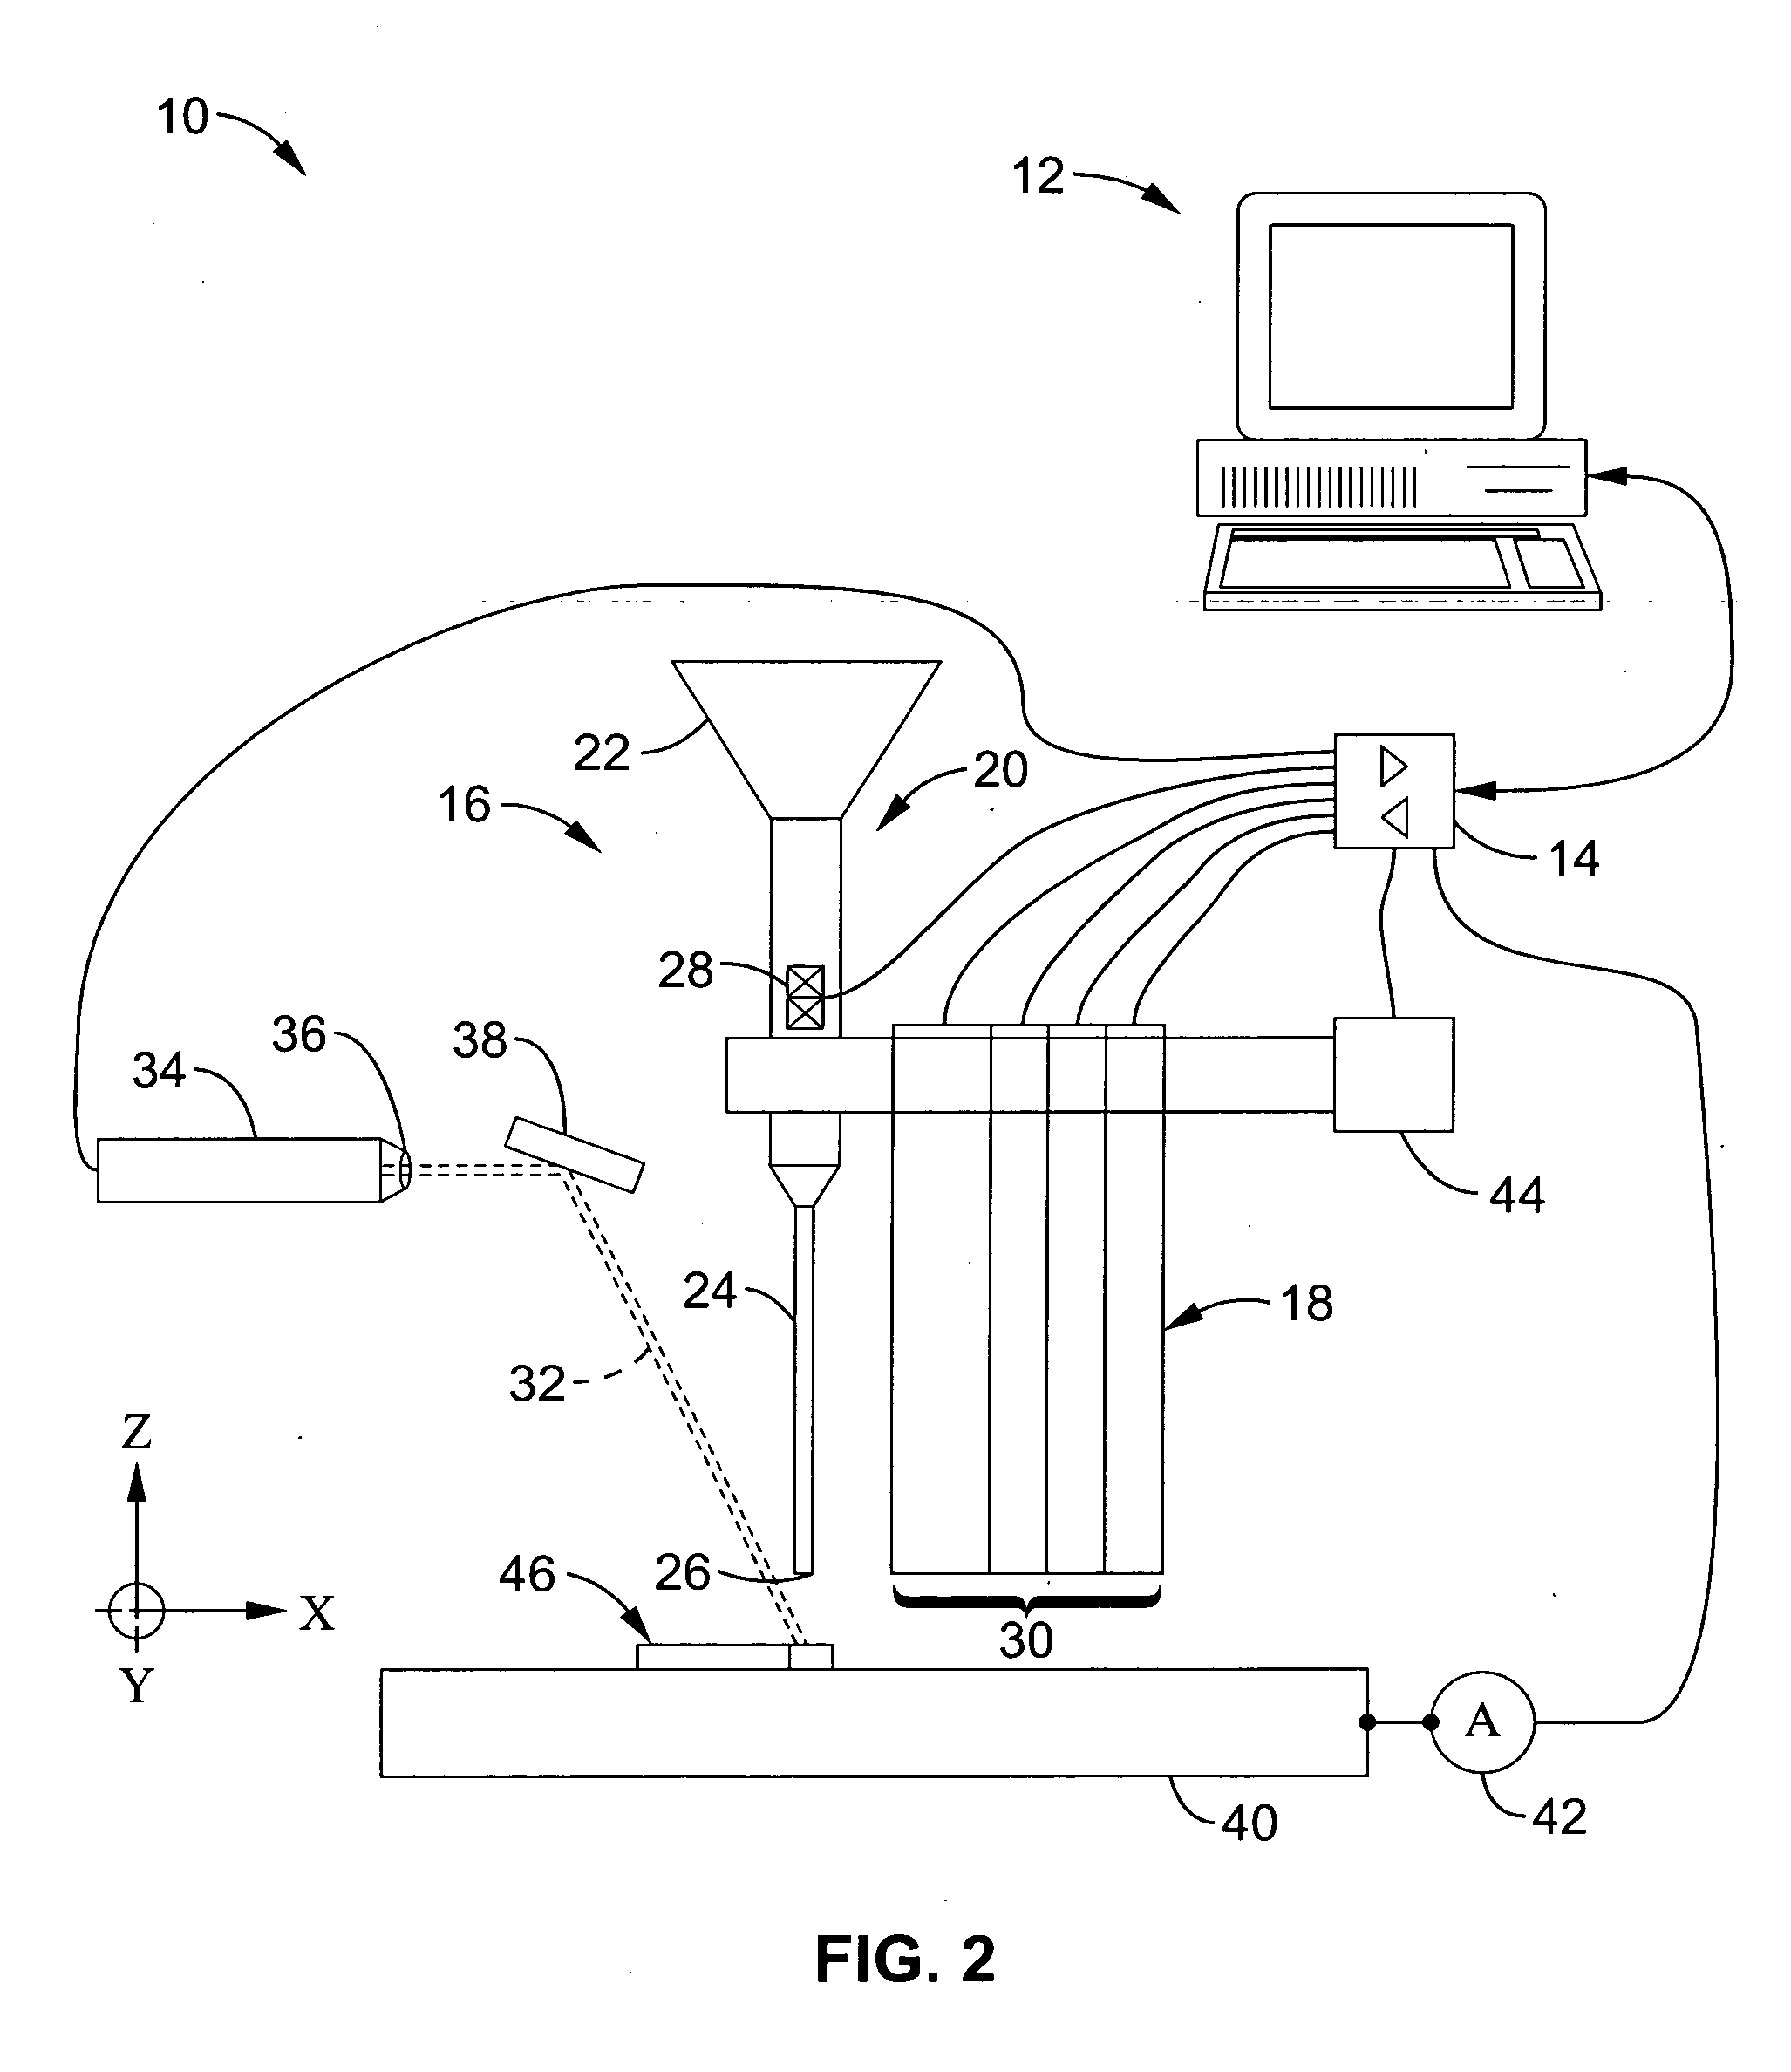 Direct write and freeform fabrication apparatus and method